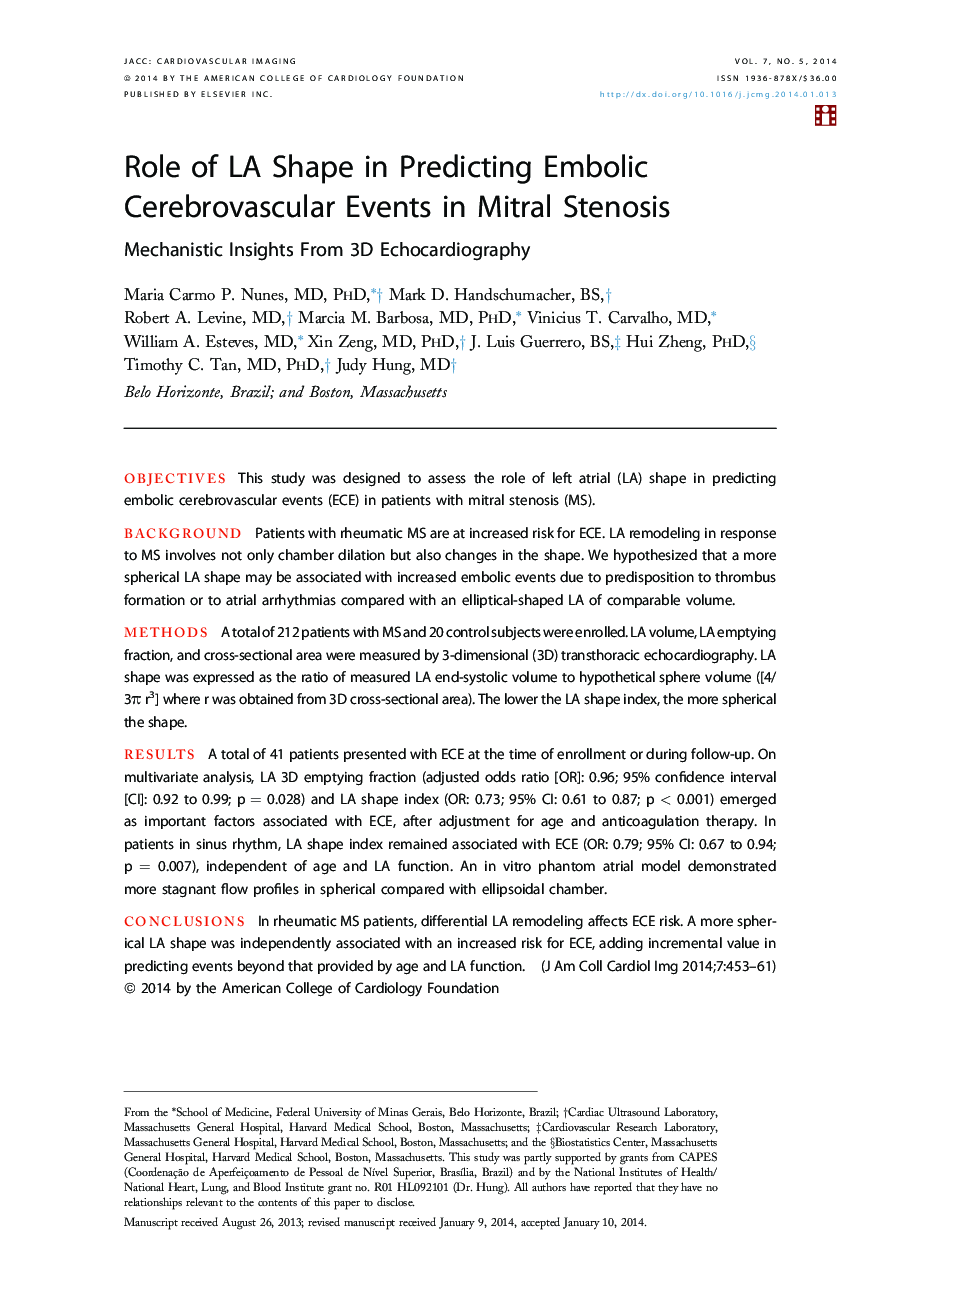 Role of LA Shape in Predicting Embolic Cerebrovascular Events in Mitral Stenosis : Mechanistic Insights From 3D Echocardiography